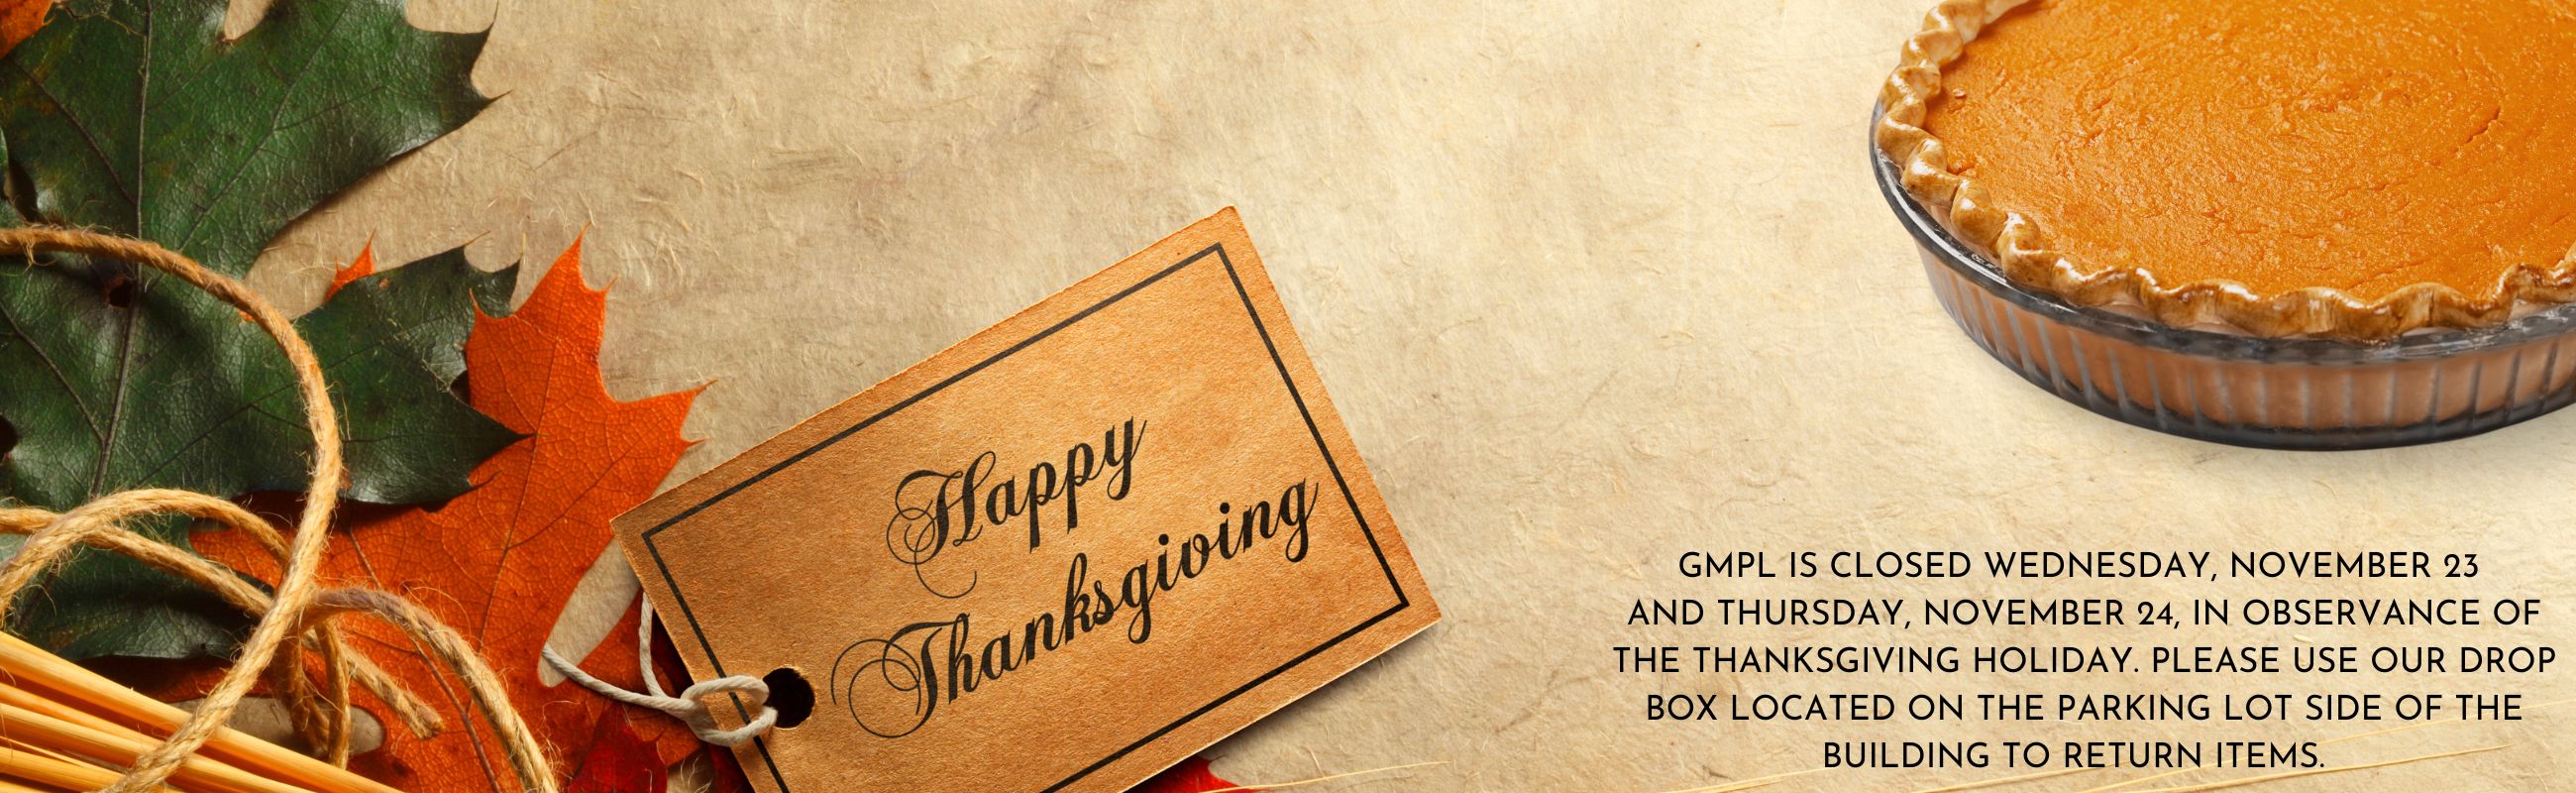 The Library is closed Wednesday, November 23 and Thursday, November 24 in observance of the Thanksgiving Holiday.